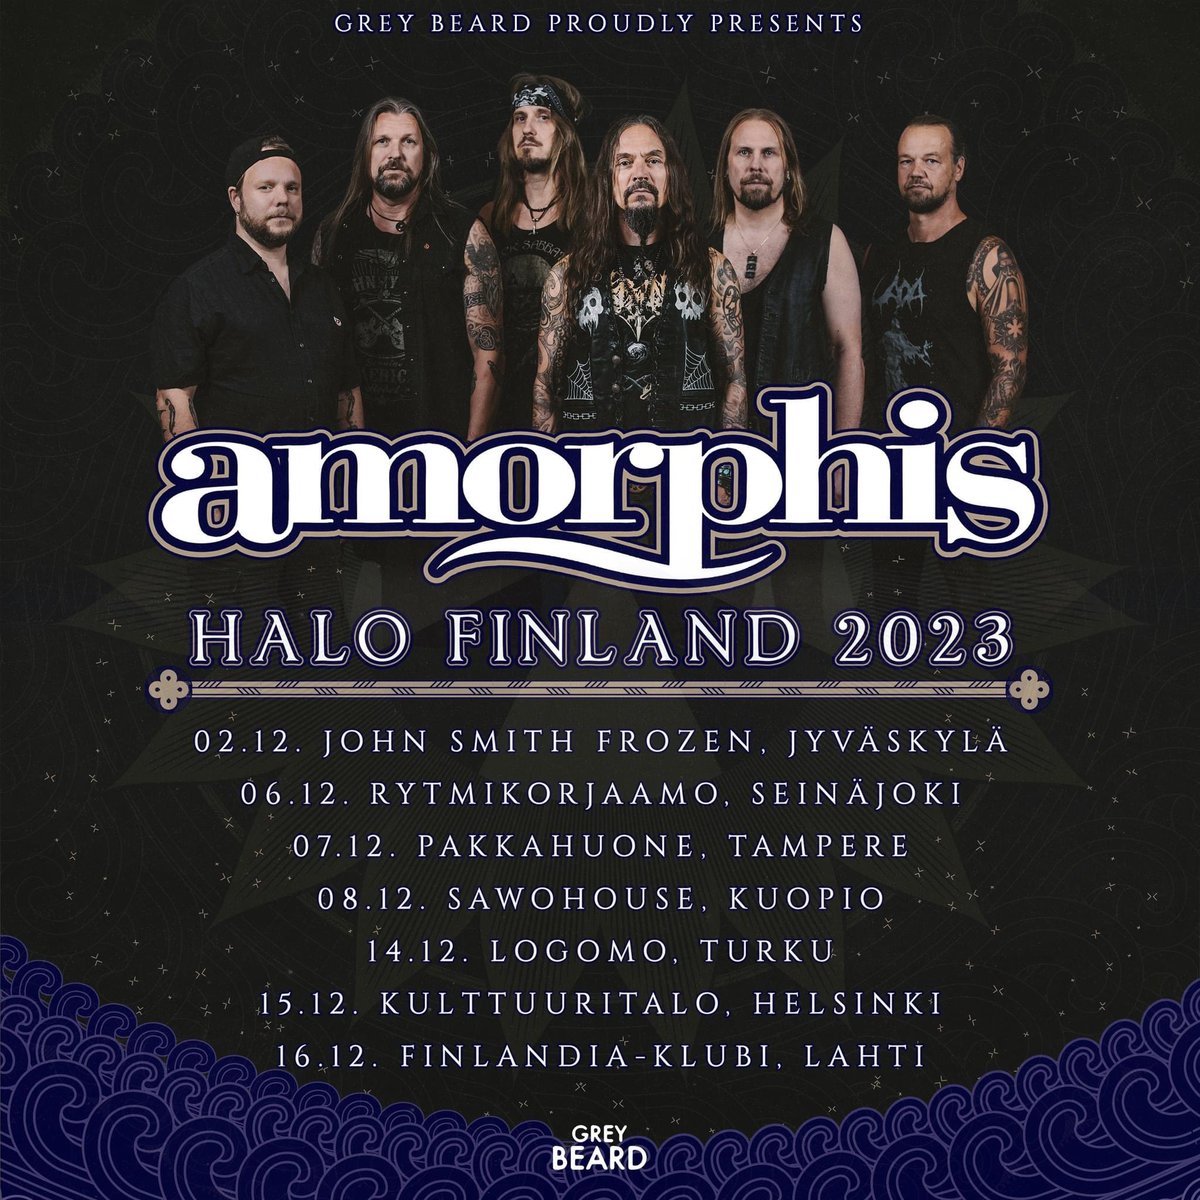 🇫🇮 Tickets are on sale for the Halo Finland 2023 tour! These dates will sell quickly, so don't miss your opportunity to join us in December. amorphis.net/tour #amorphis #amorphishalotour